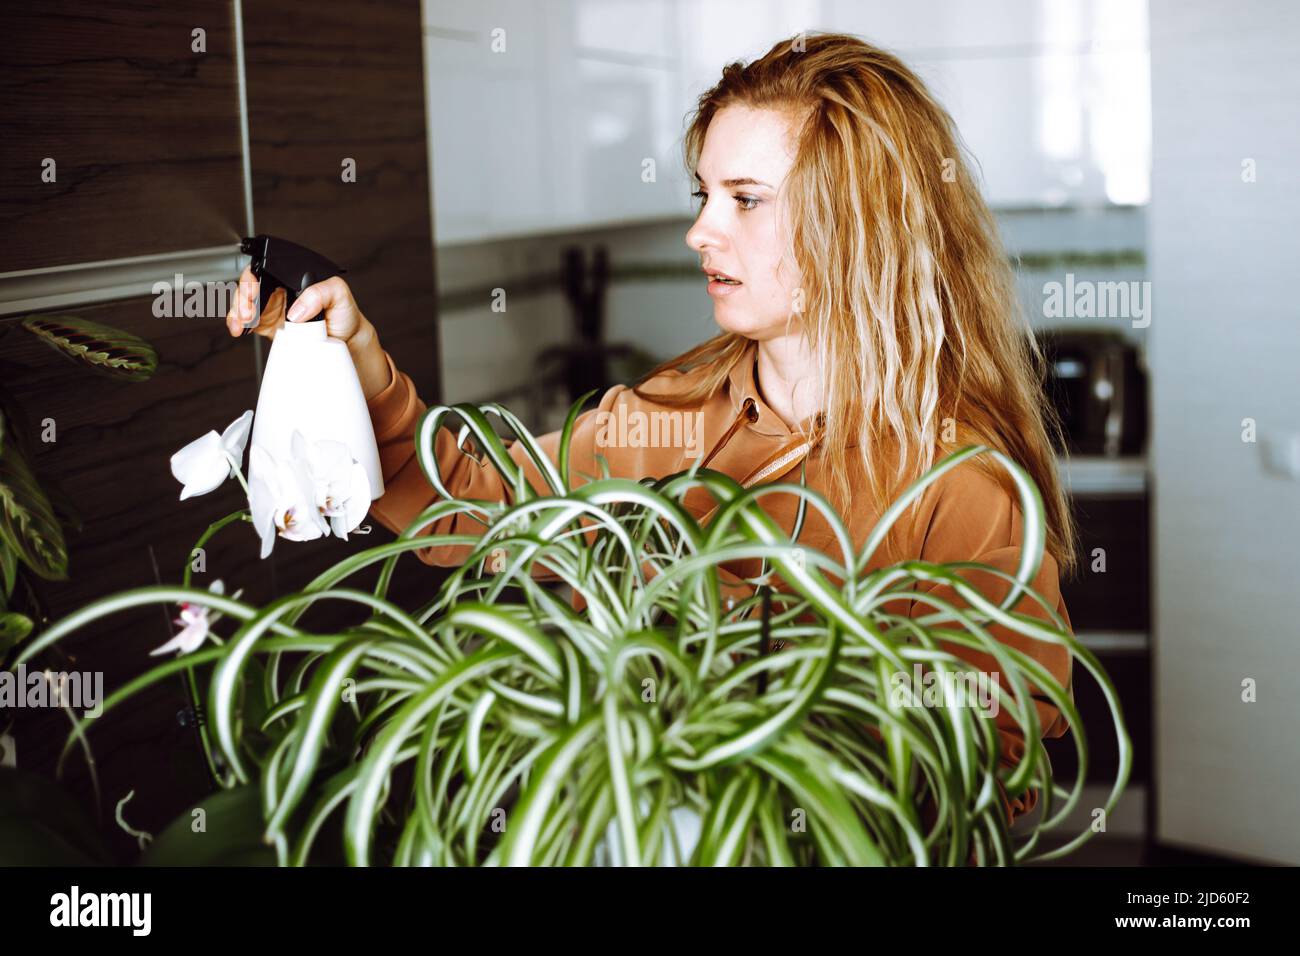 Portrait of young attractive woman with wavy fair hair wearing brown sweatshirt, watering indoor plant Chlorophytum. Stock Photo